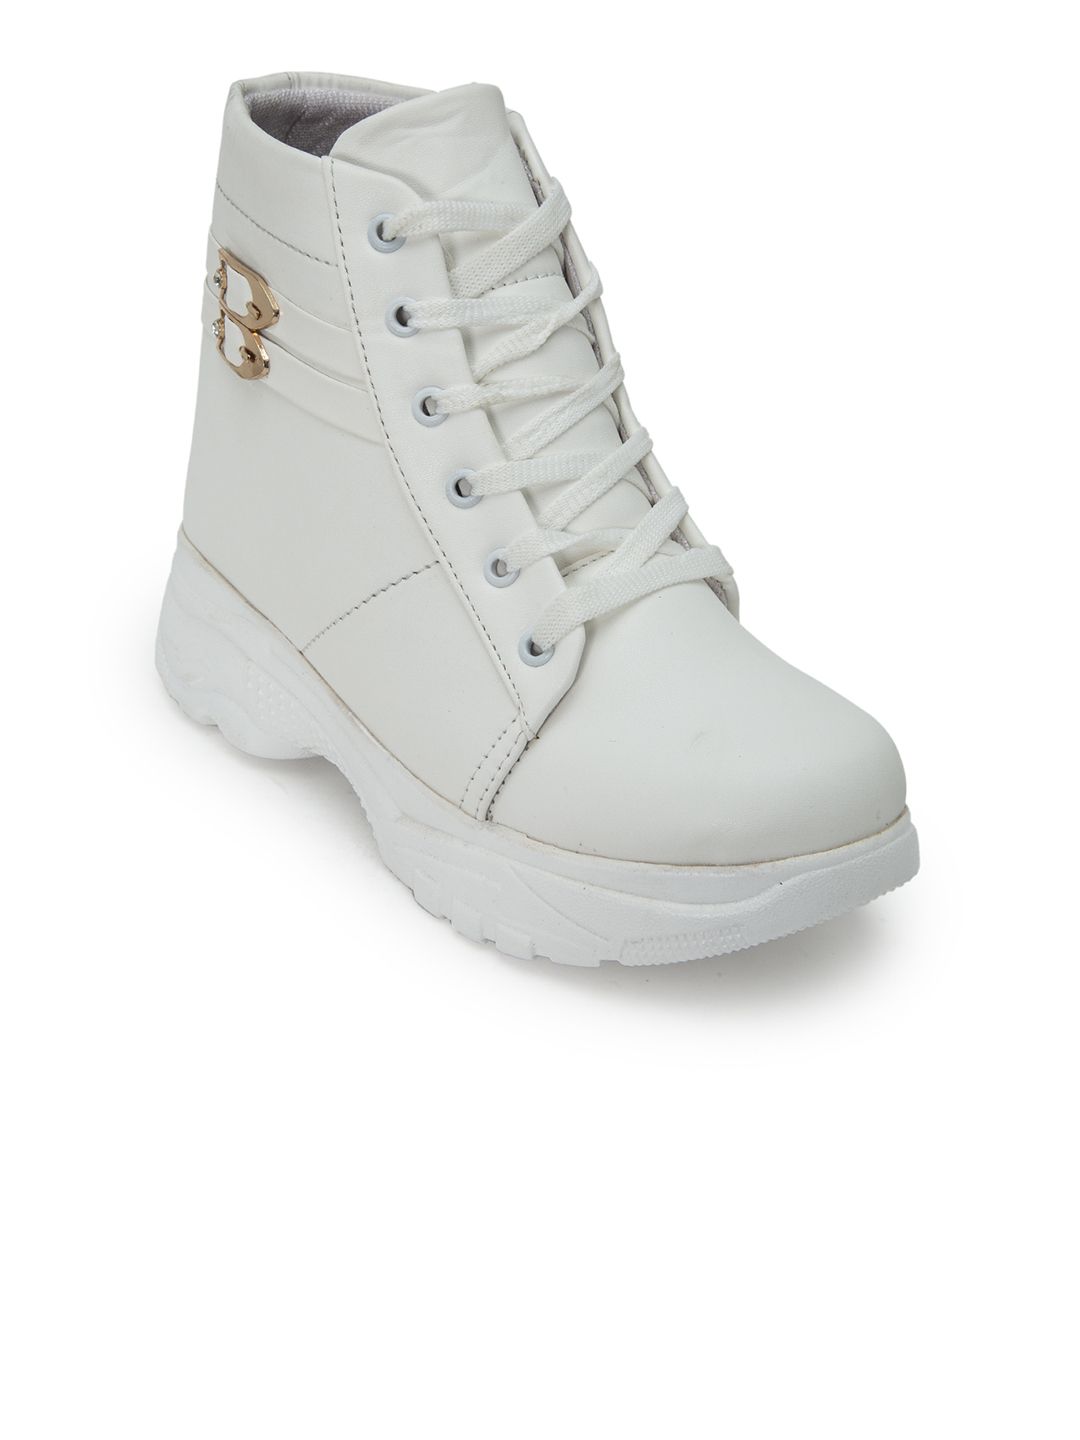 DEAS Off White Block Heeled Boots Price in India